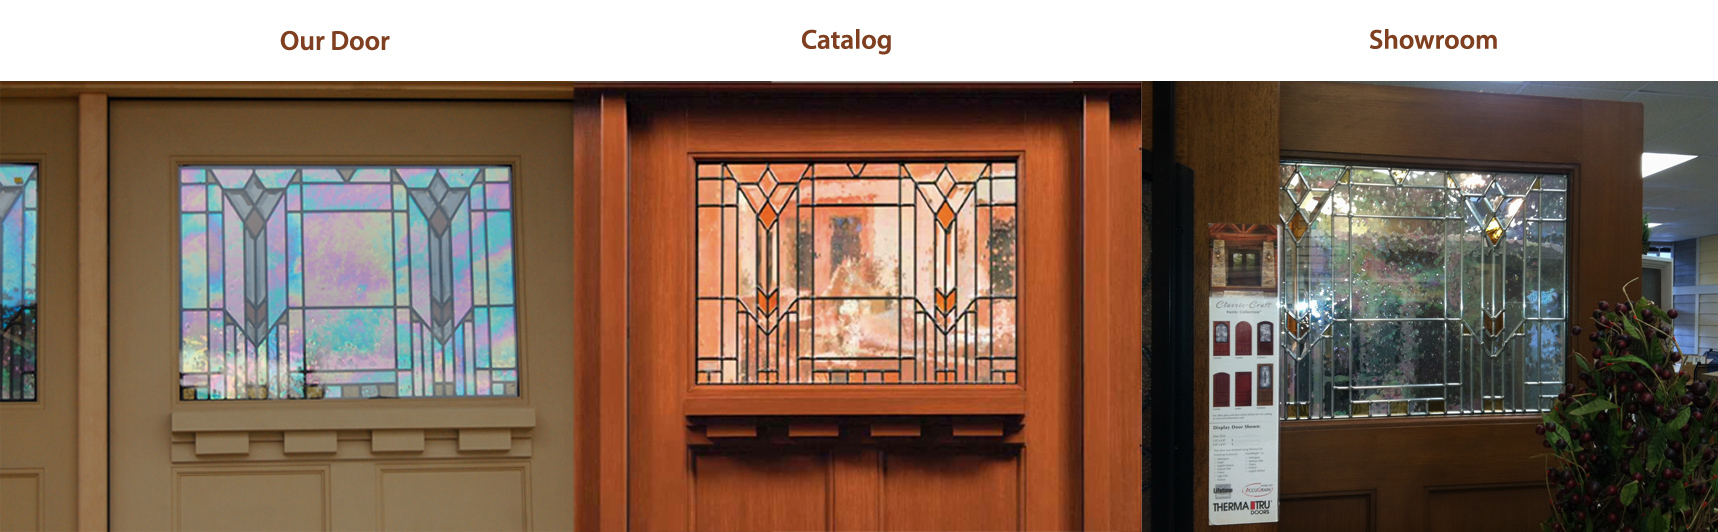 Our door should be translucent, not a rainbow mirror. Why isn't a picture like "Our Door" in your catalog? 